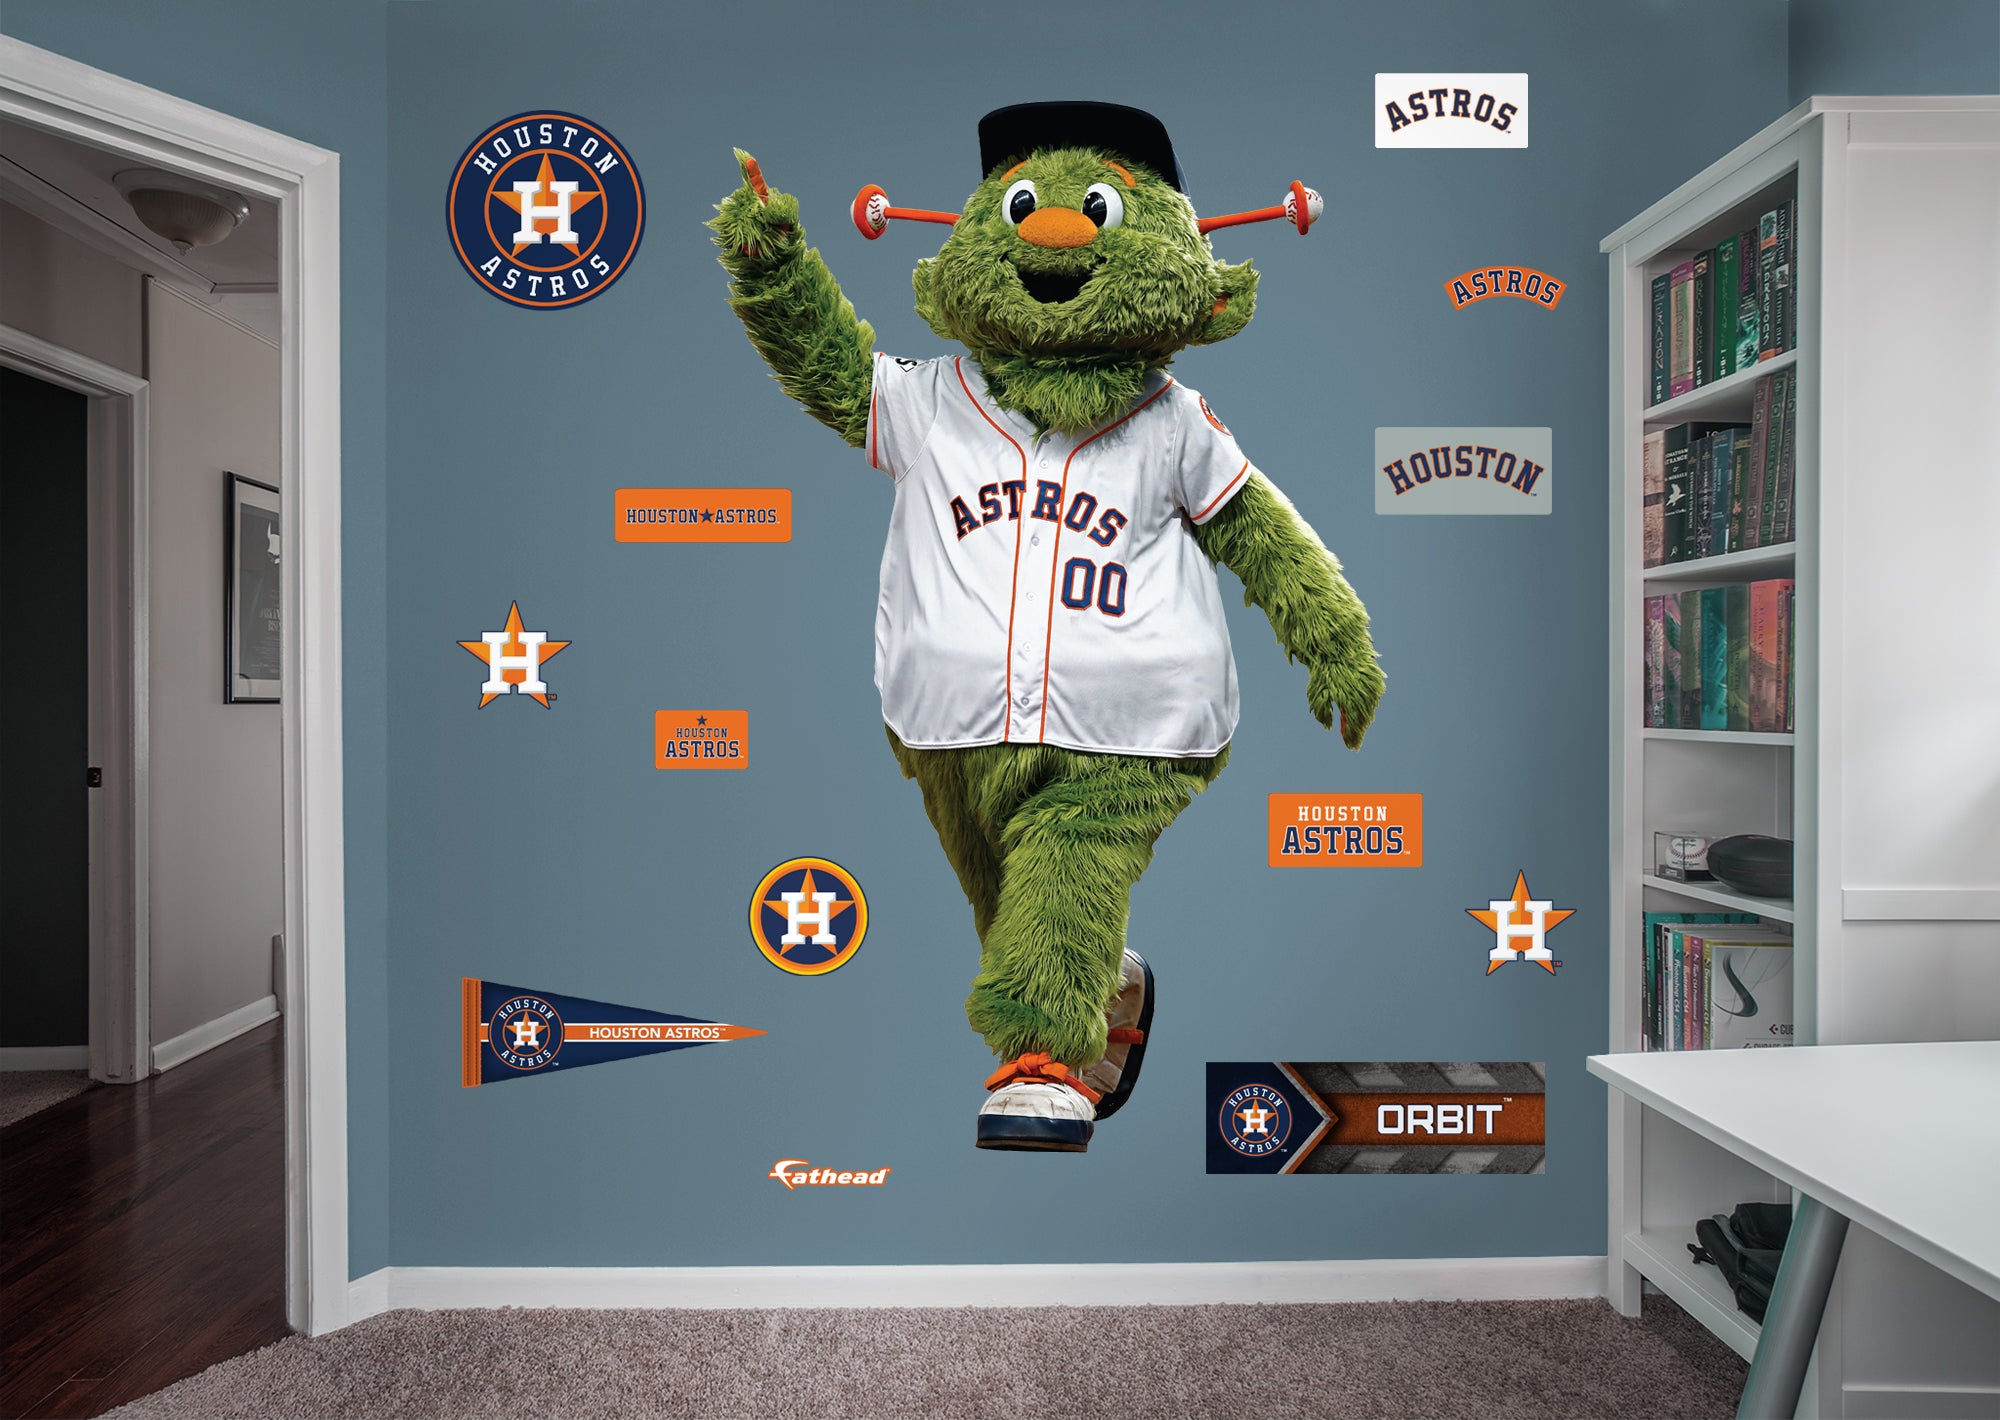 Orbit and the Astros wish Happy Holidays to all 